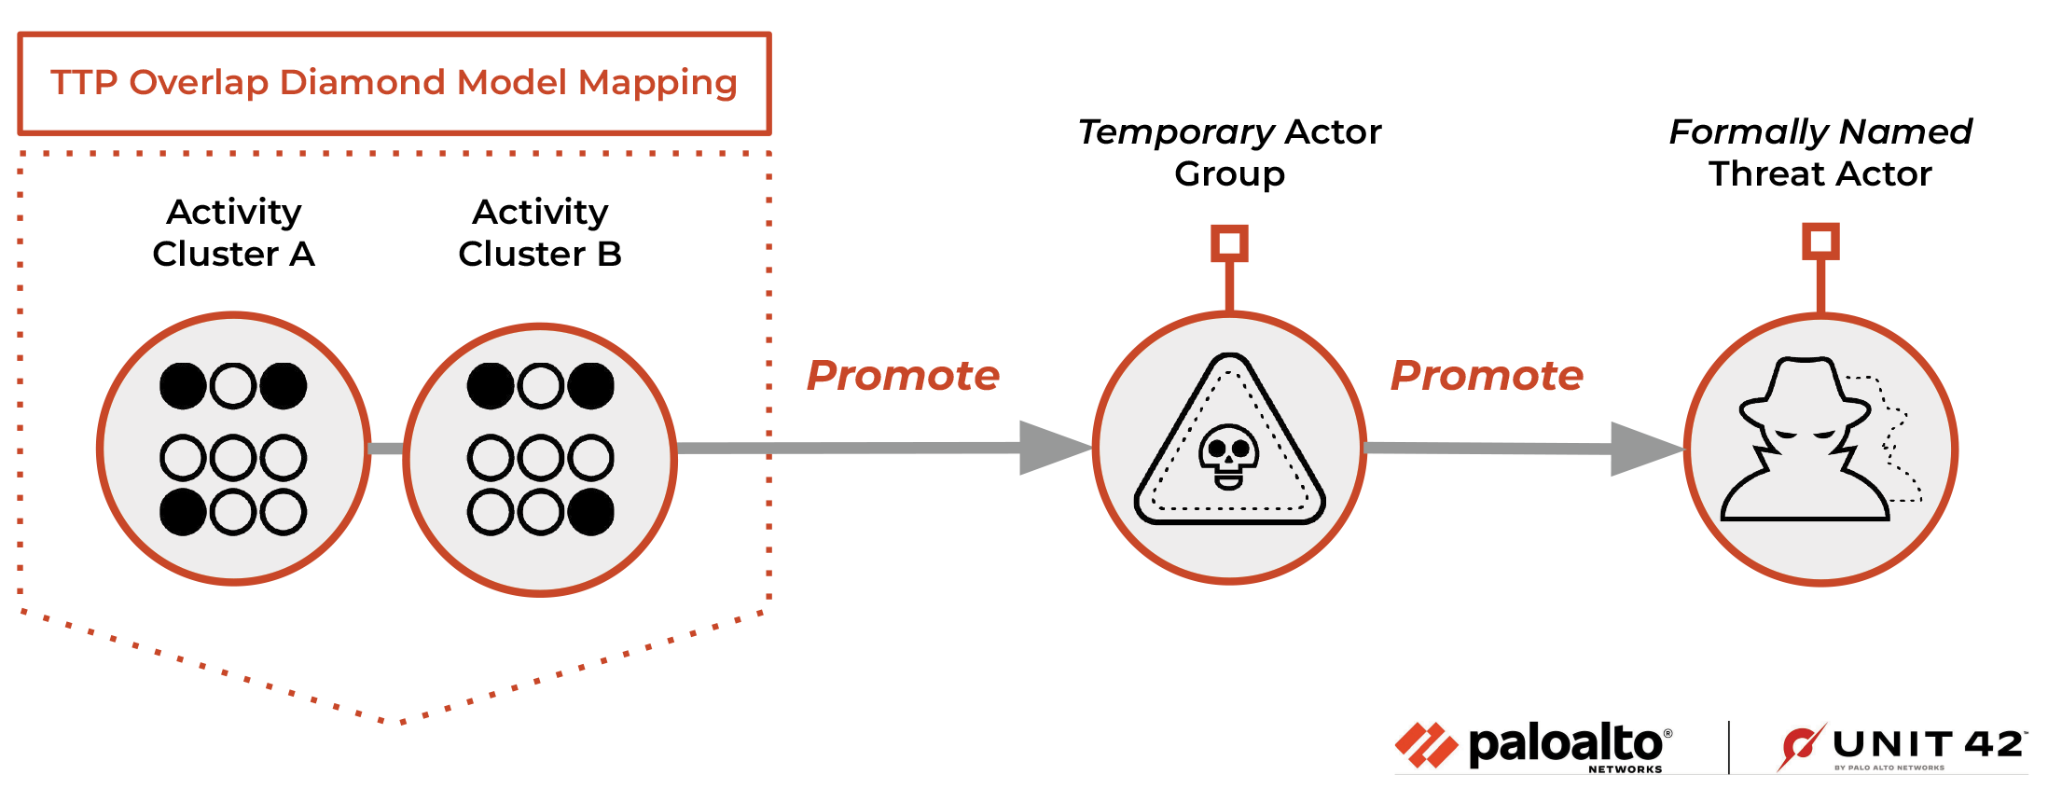 Figure 1 is a flow chart of how a threat actor gets named. It starts with threat actor, activity mapping mapping, where a temporary actor group is monitored. Finally, the threat actor gets a formal name.